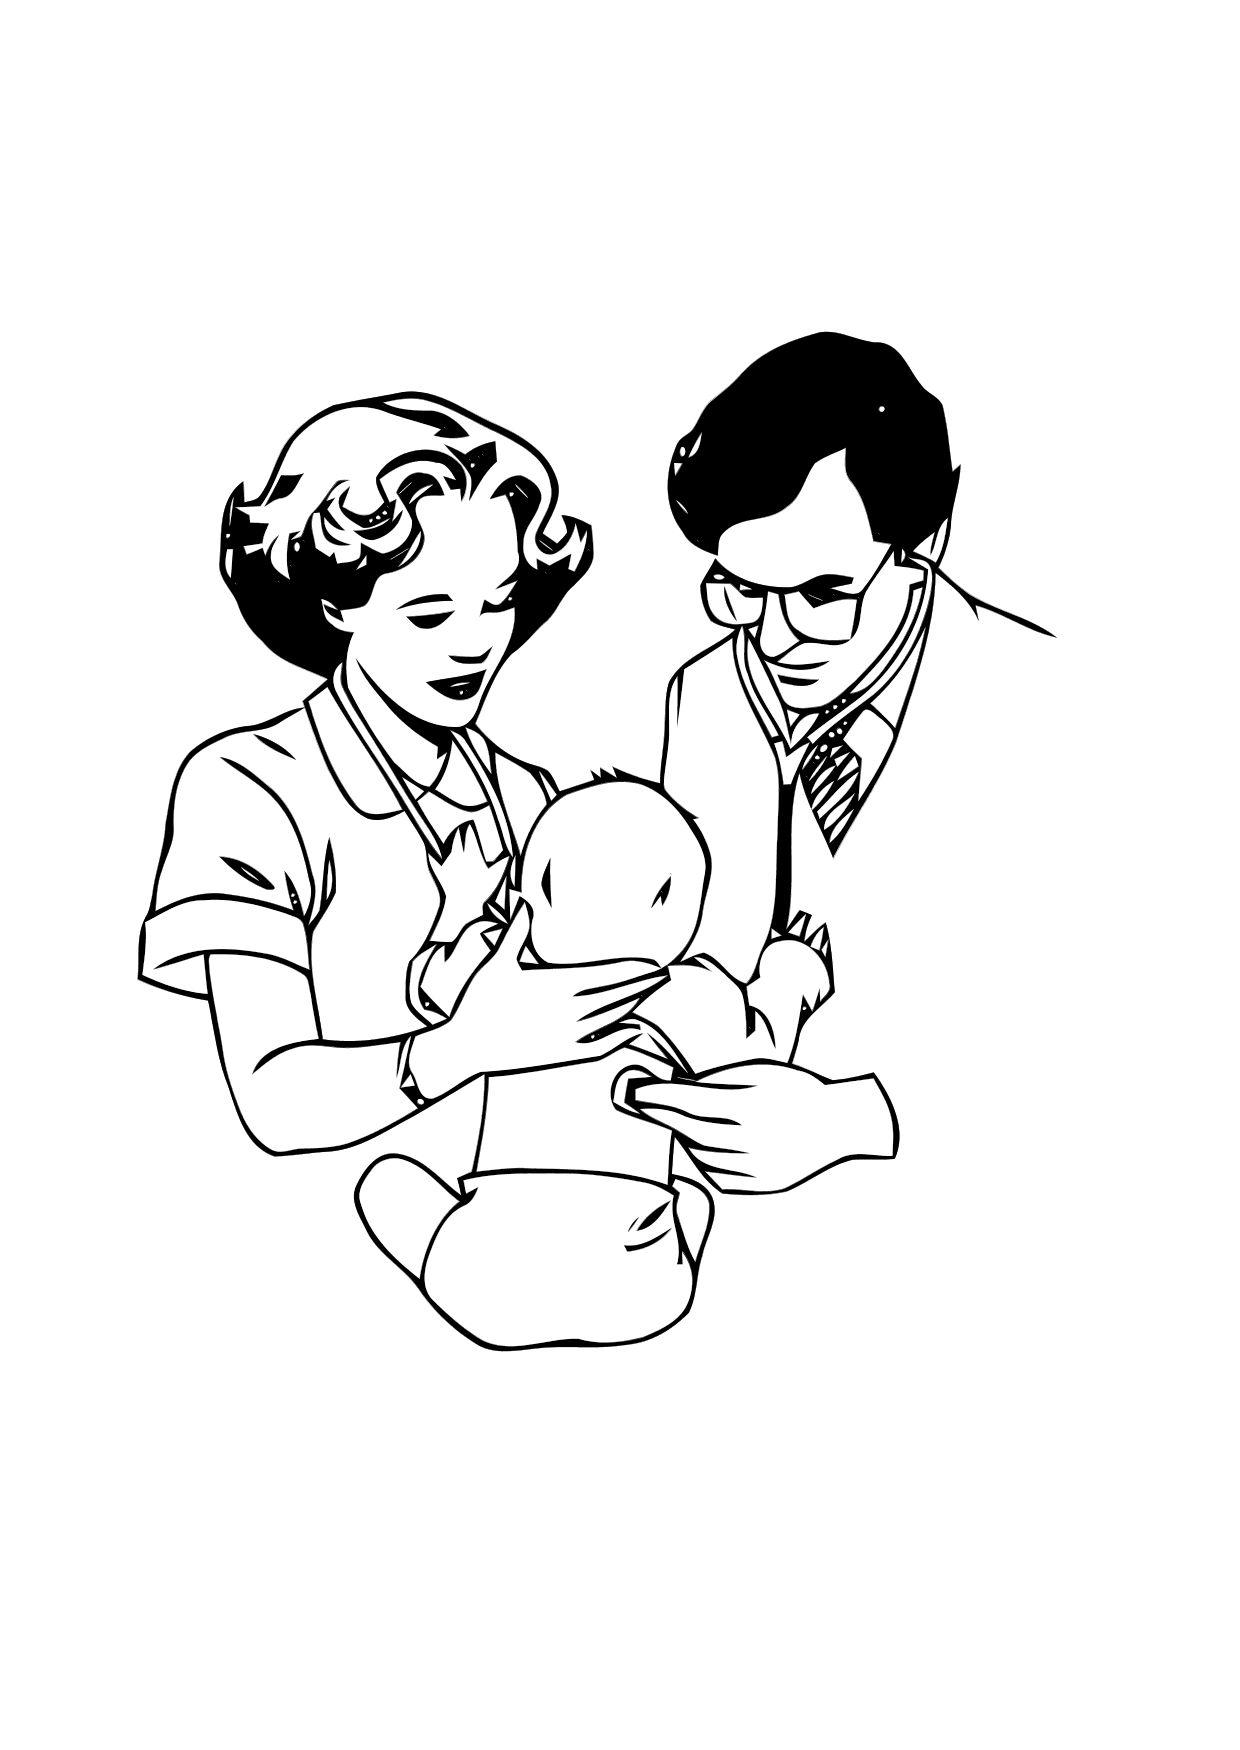 Coloring page doctor with baby